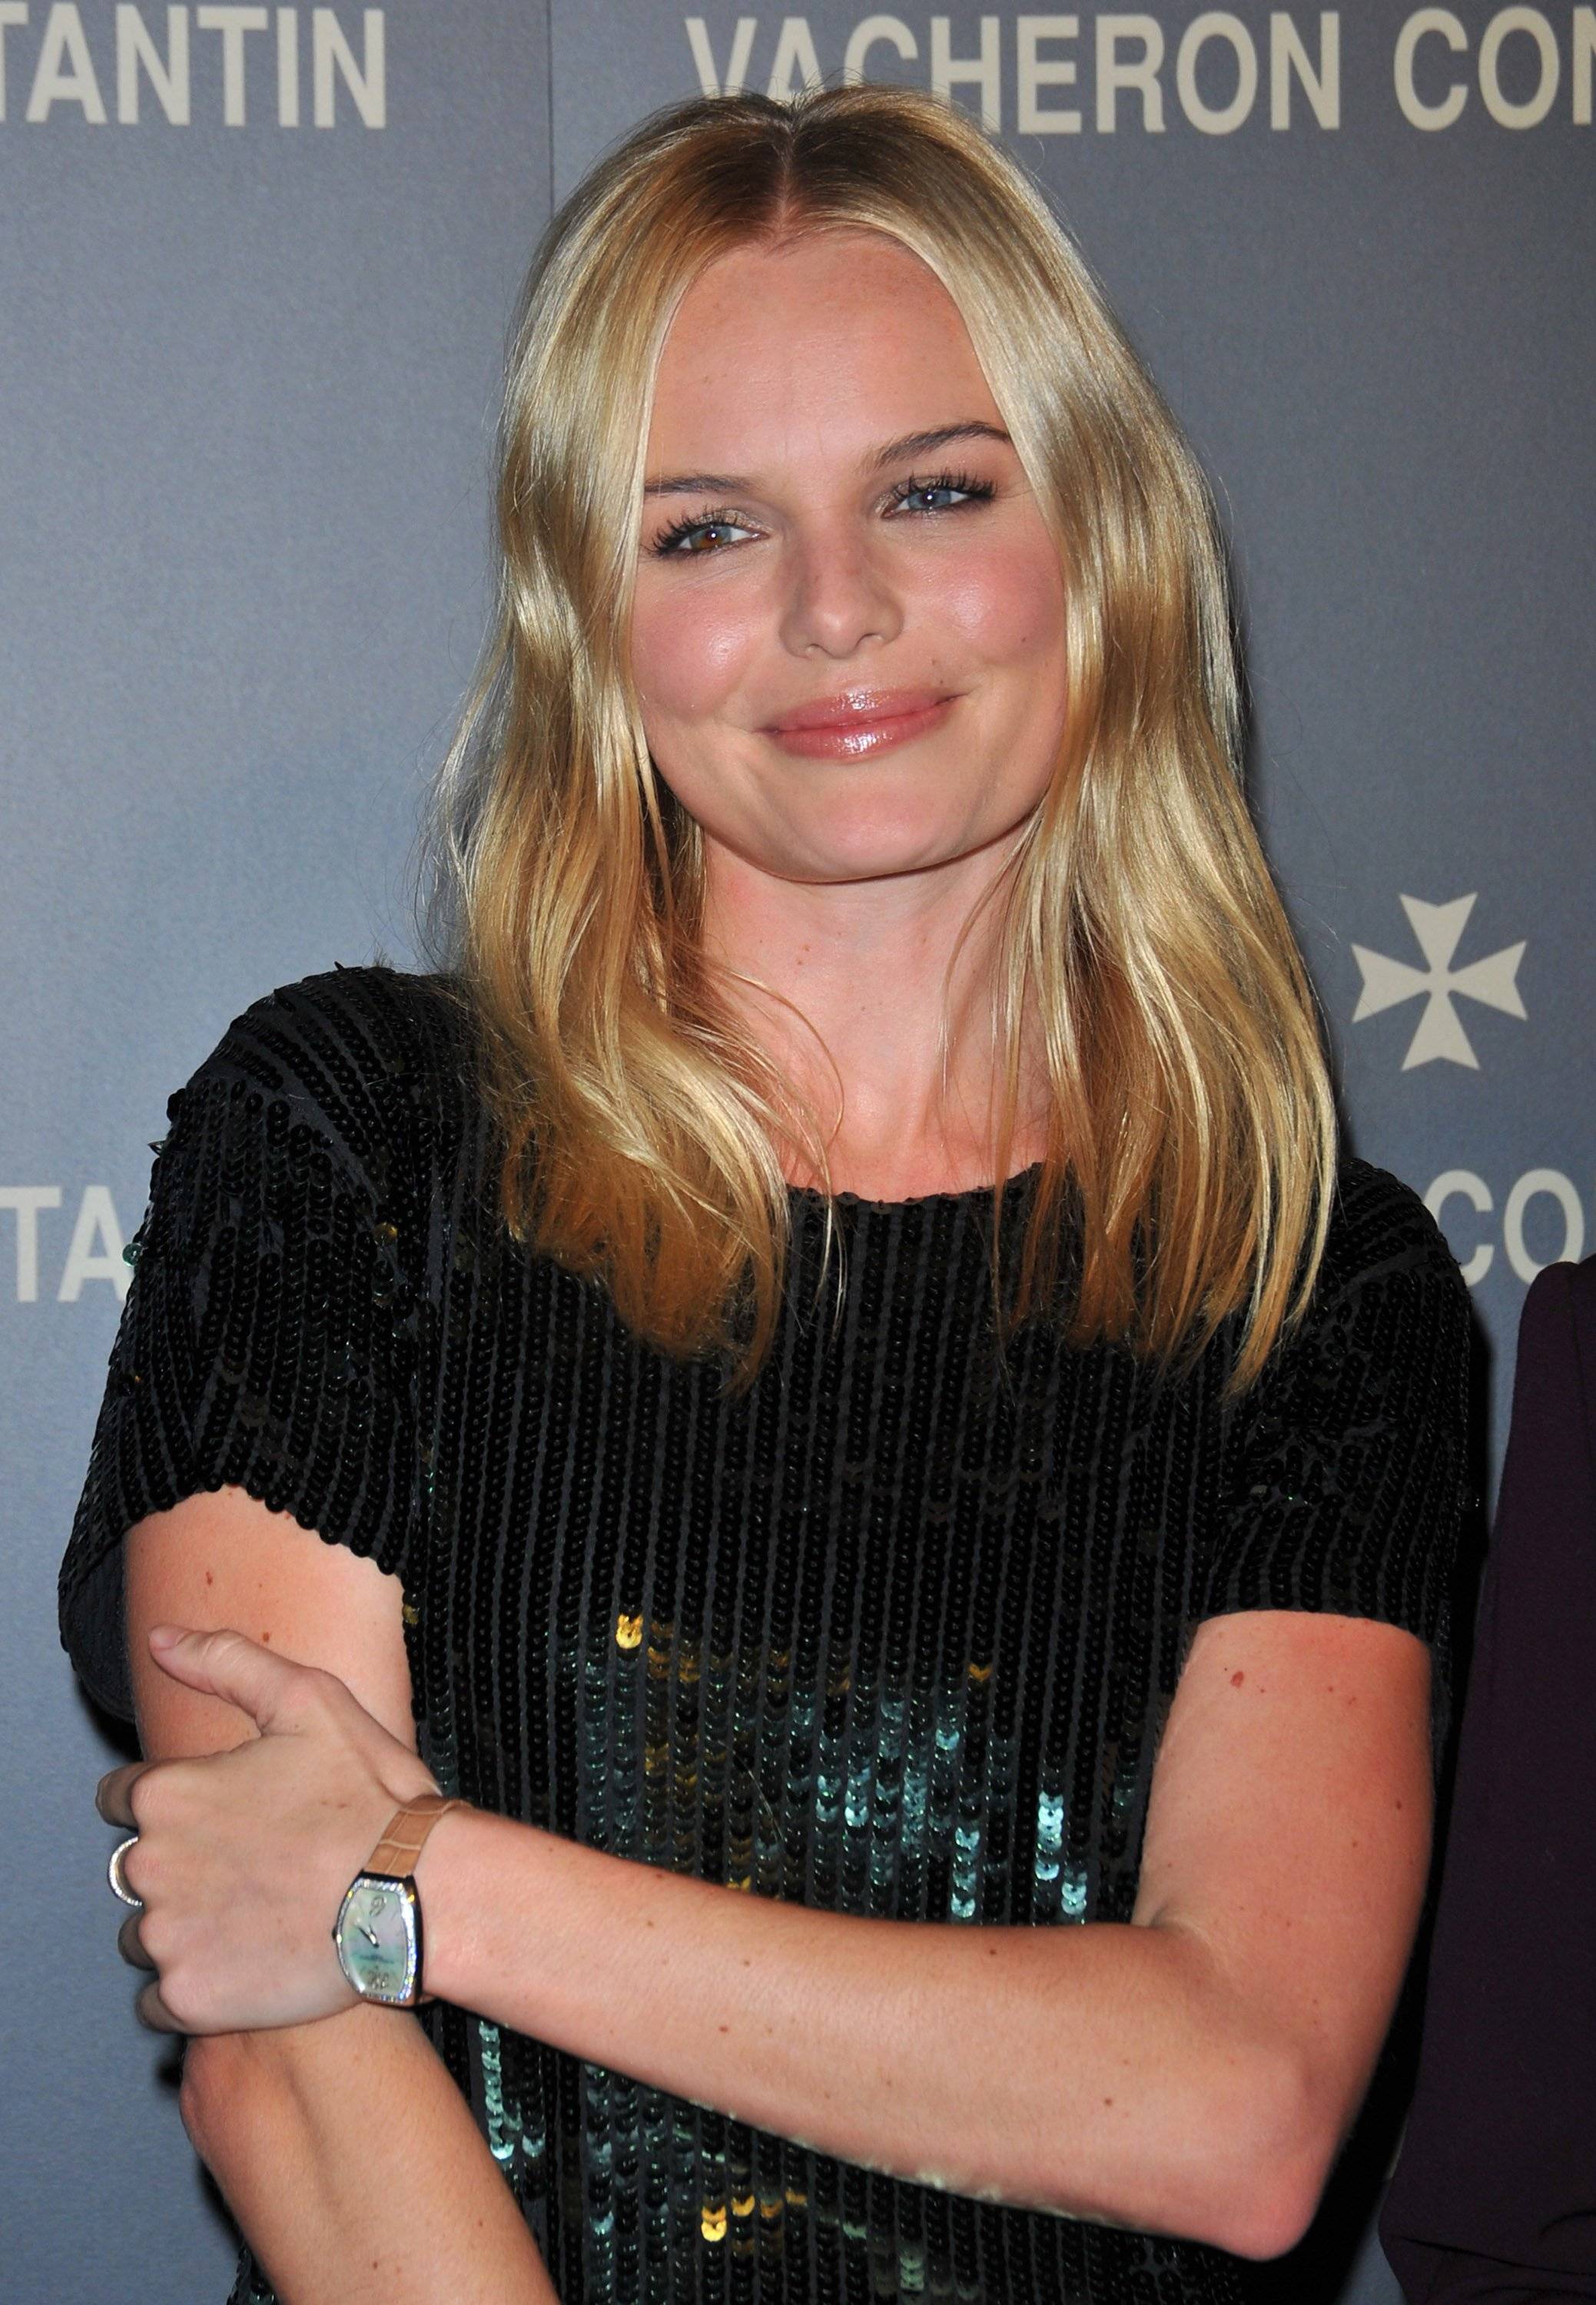 Kate Bosworth Arriving at Heathrow June 1, 2009 – Star Style